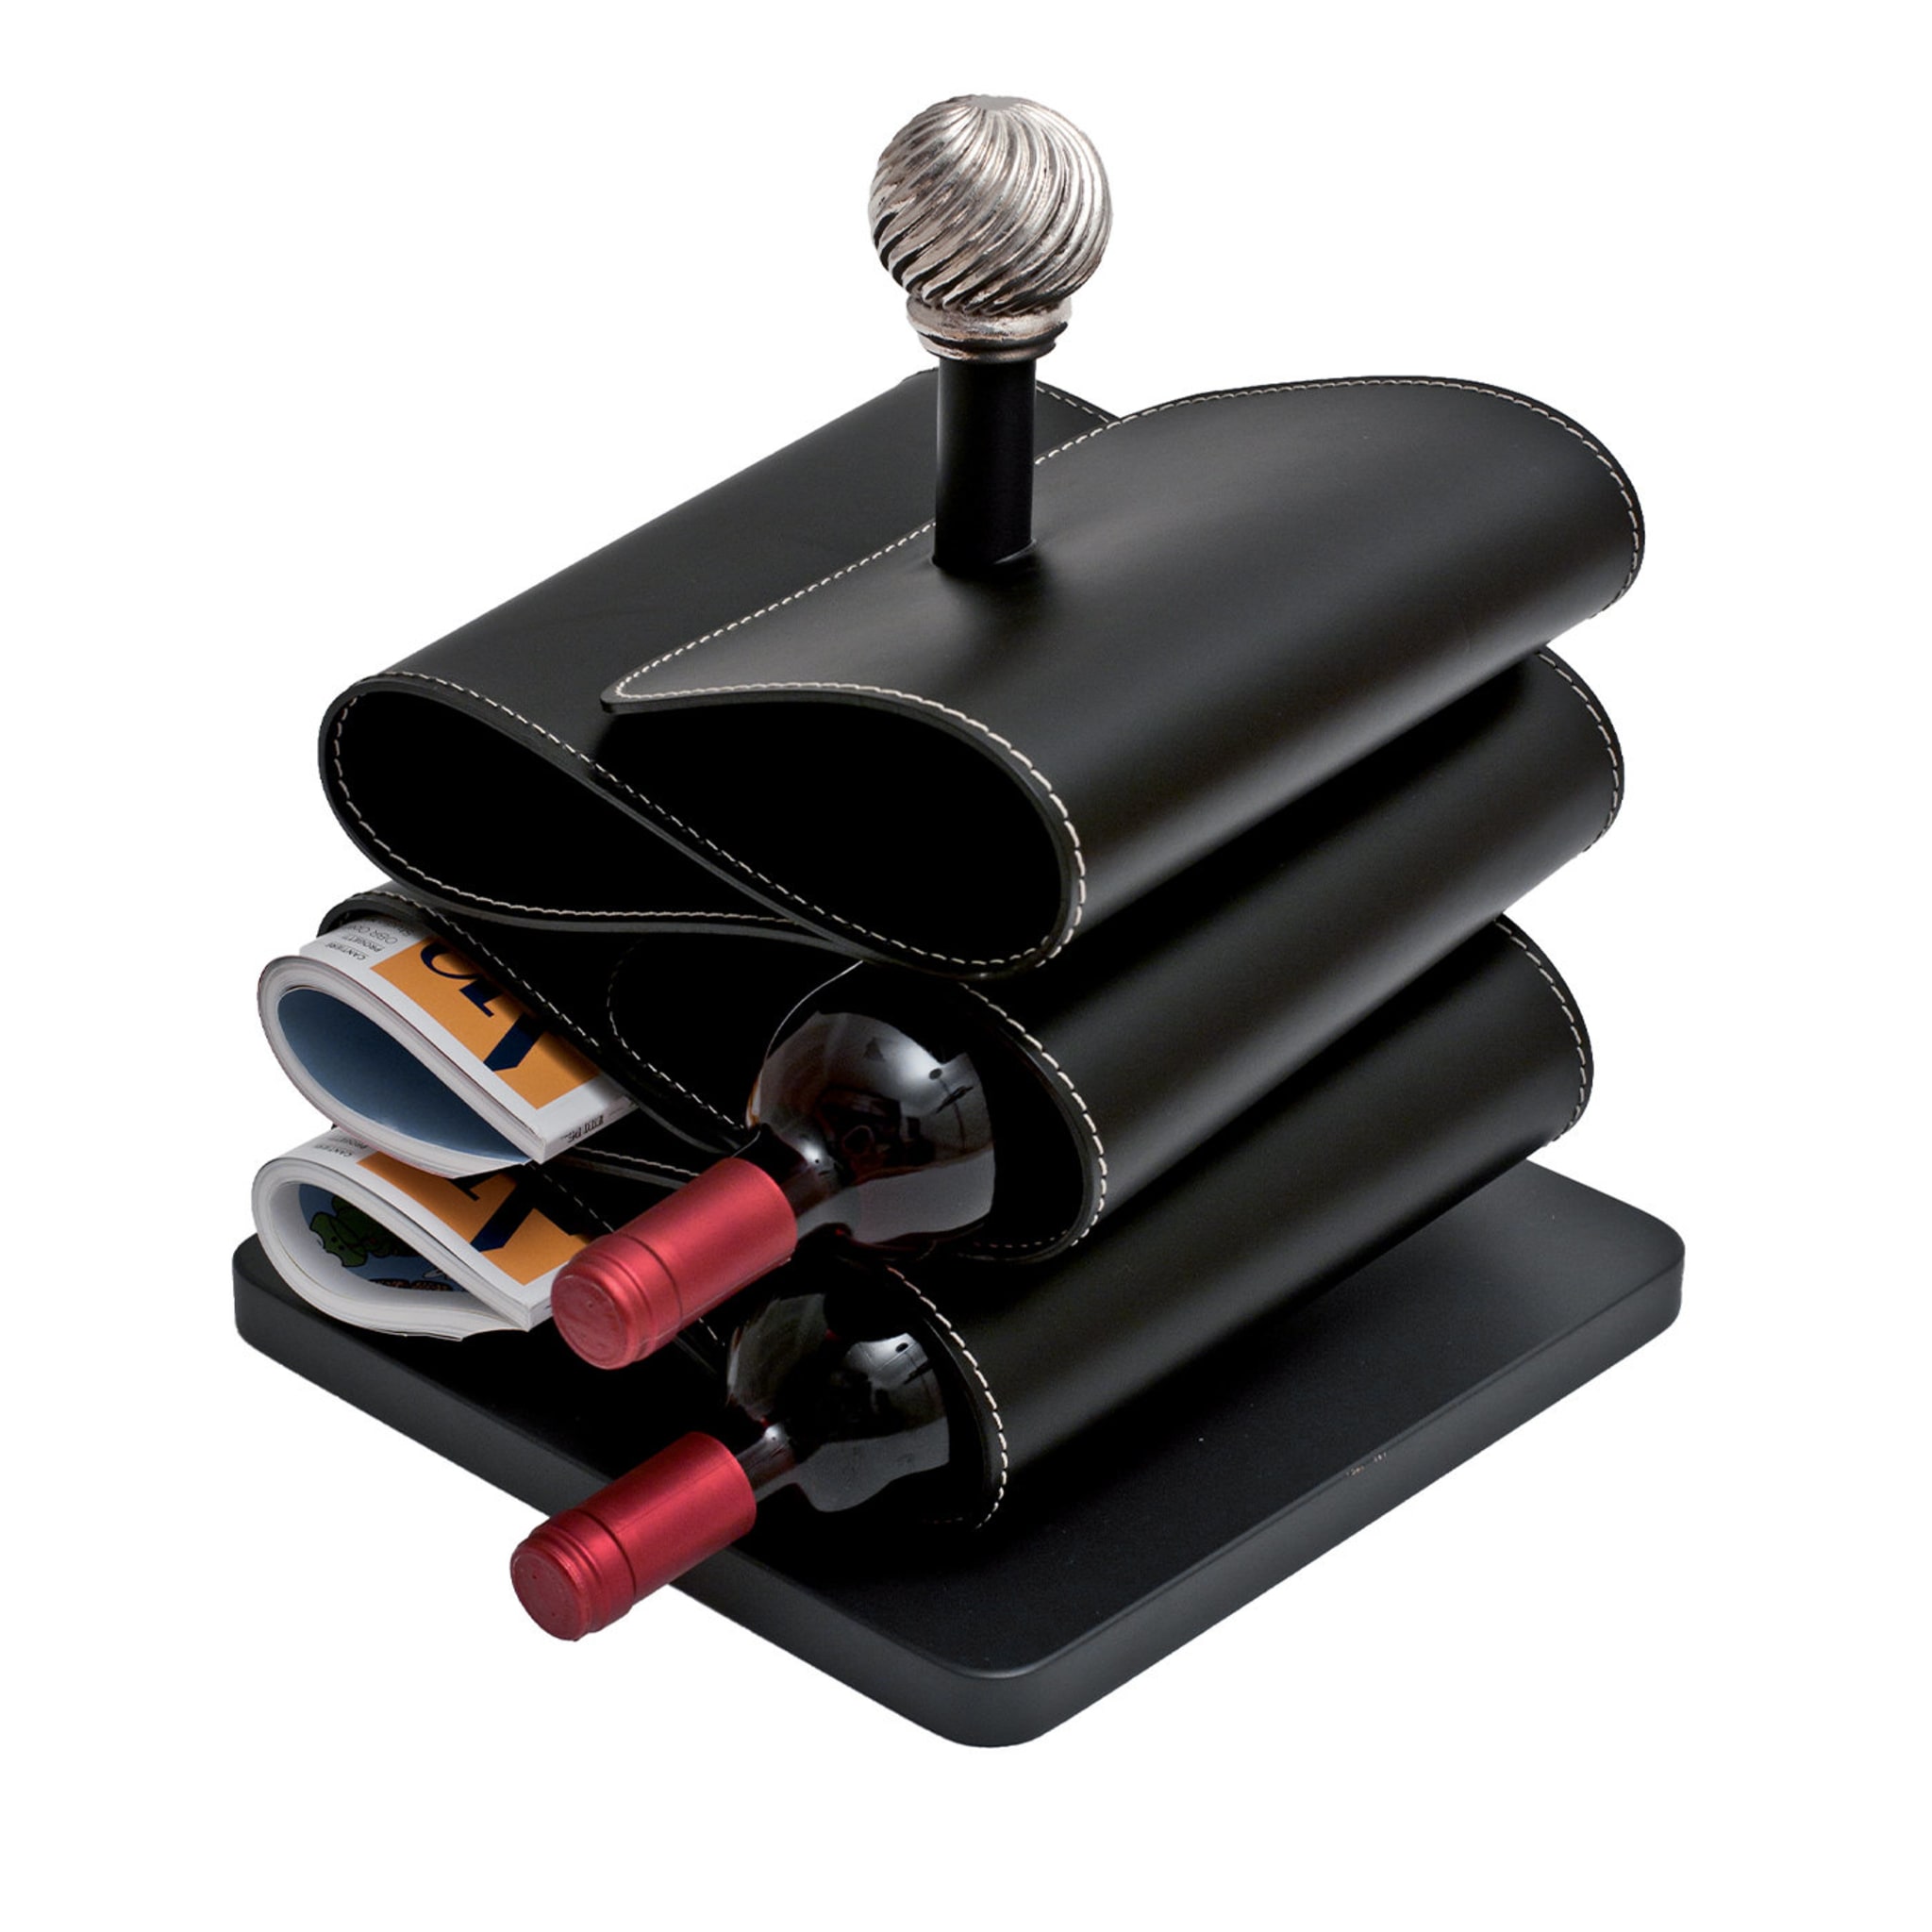 Bottle and/or Magazine Holder in Black Leather - Main view